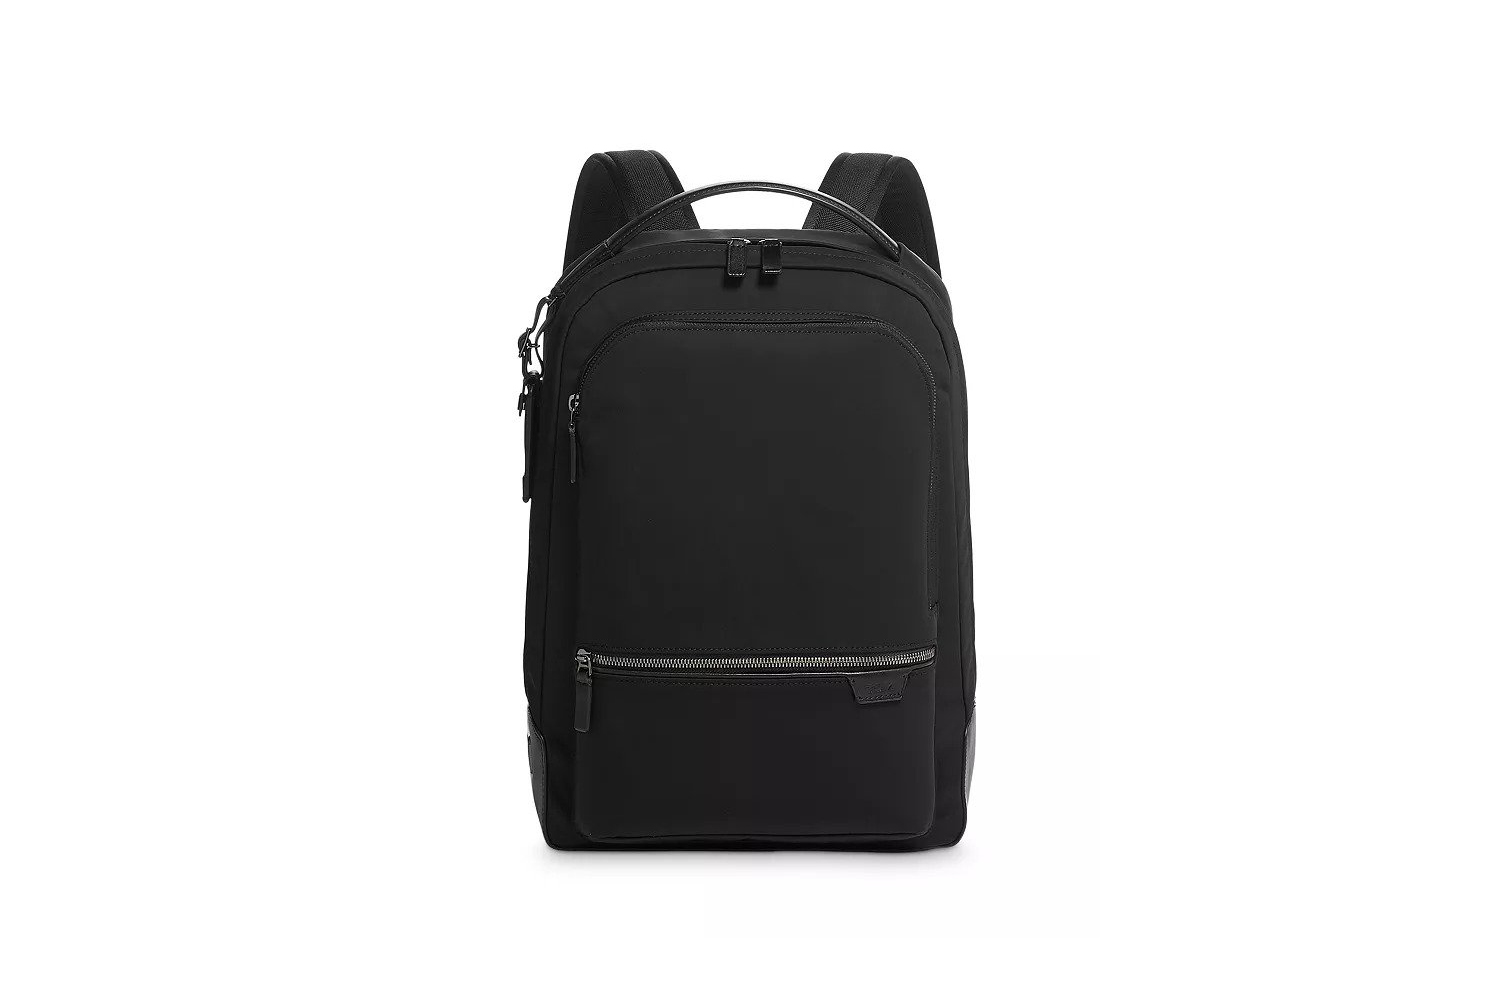 Backpacks vs. briefcases: Which style is better for work? - The Manual